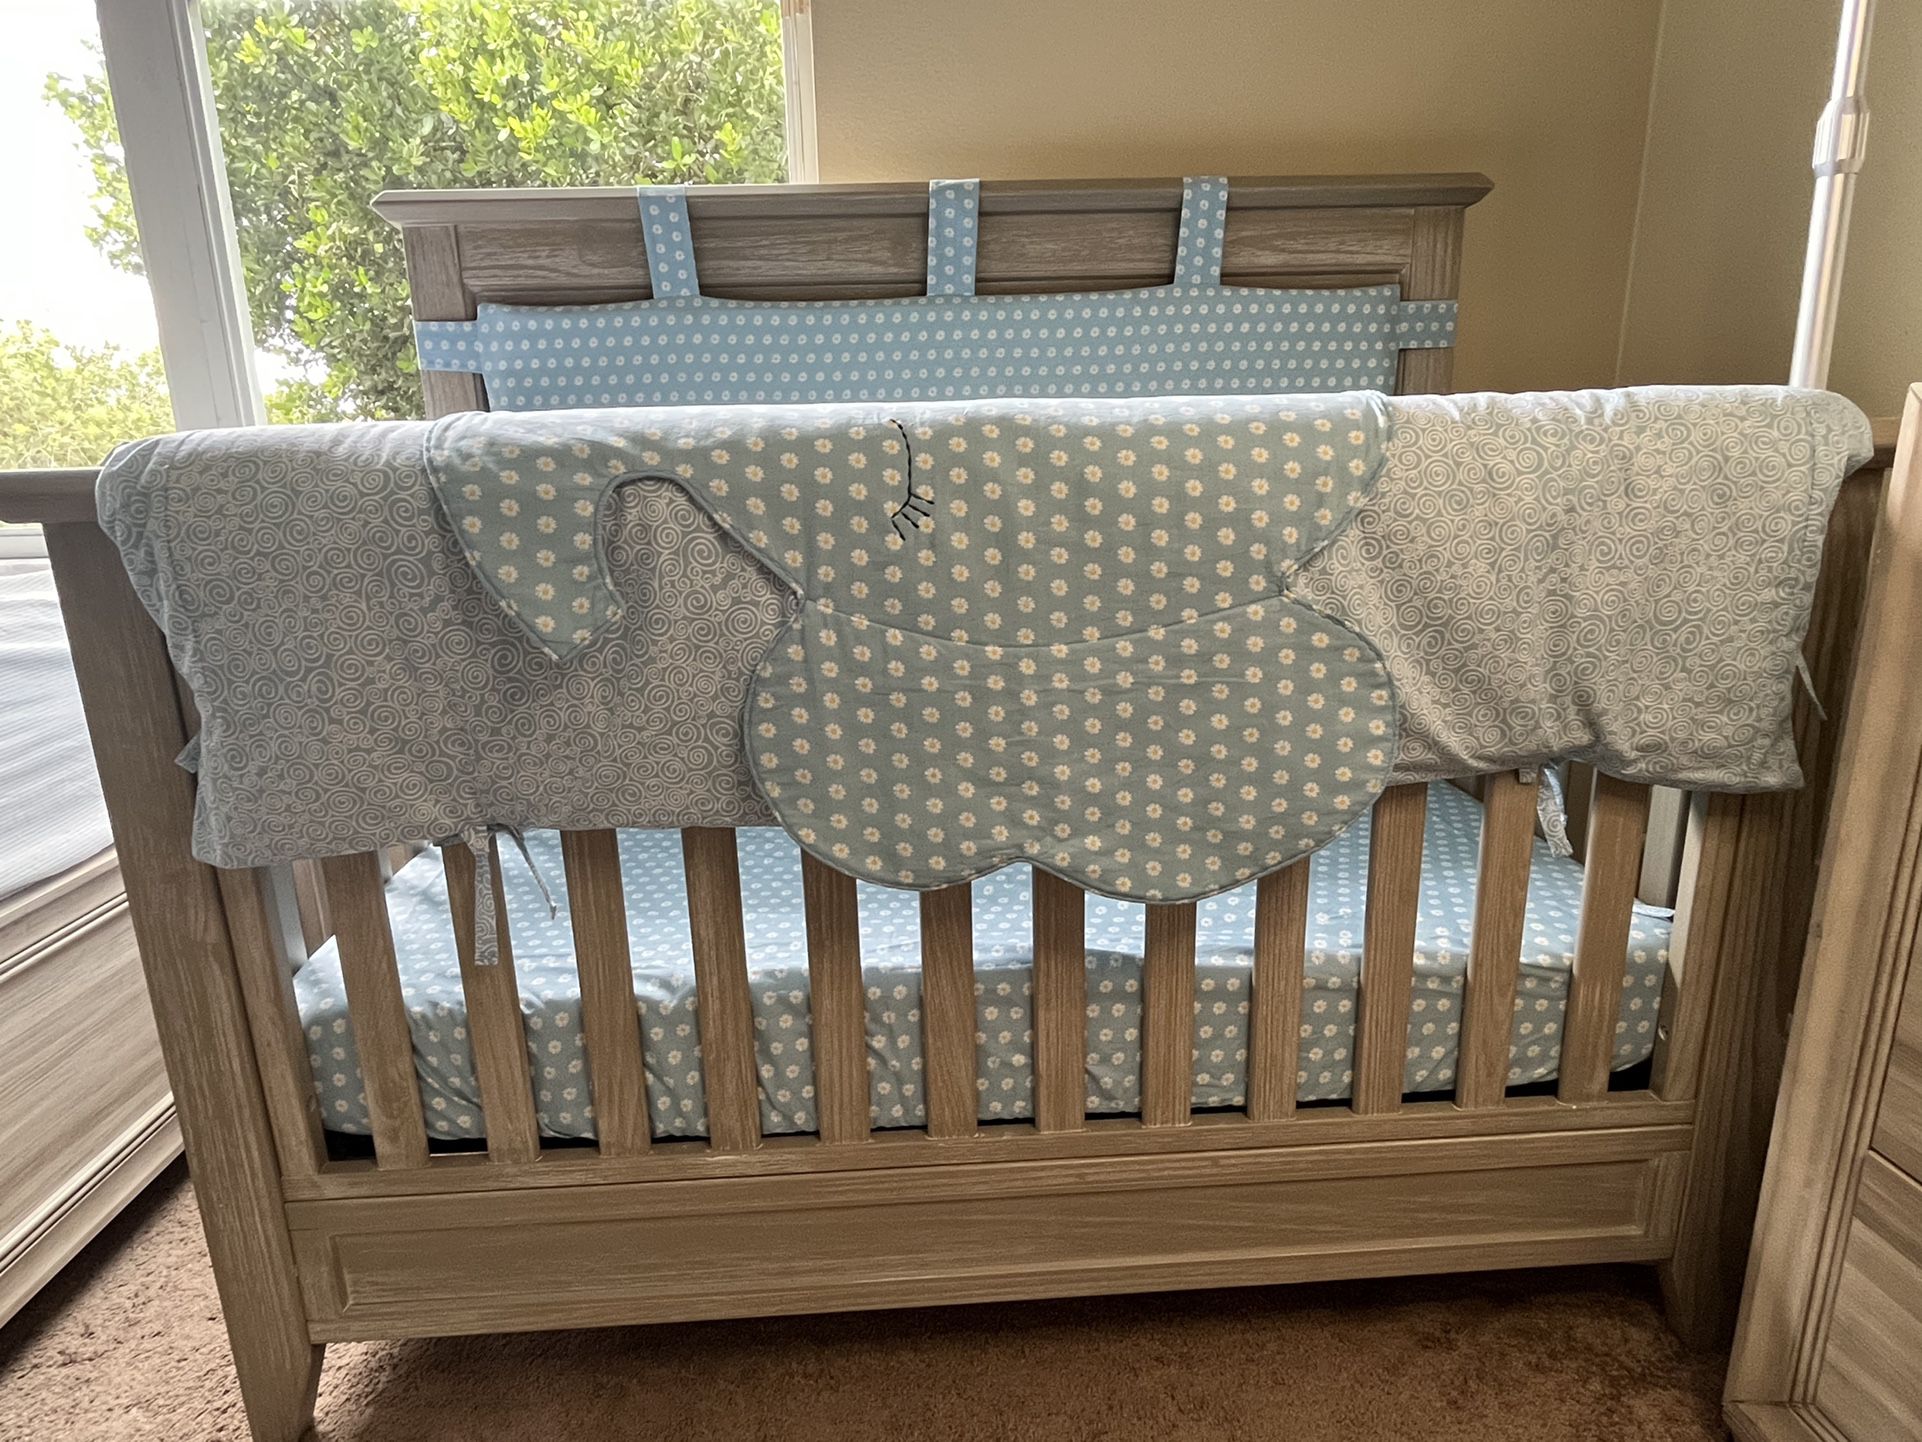 Padded crib wrap sets designed for conversion cribs